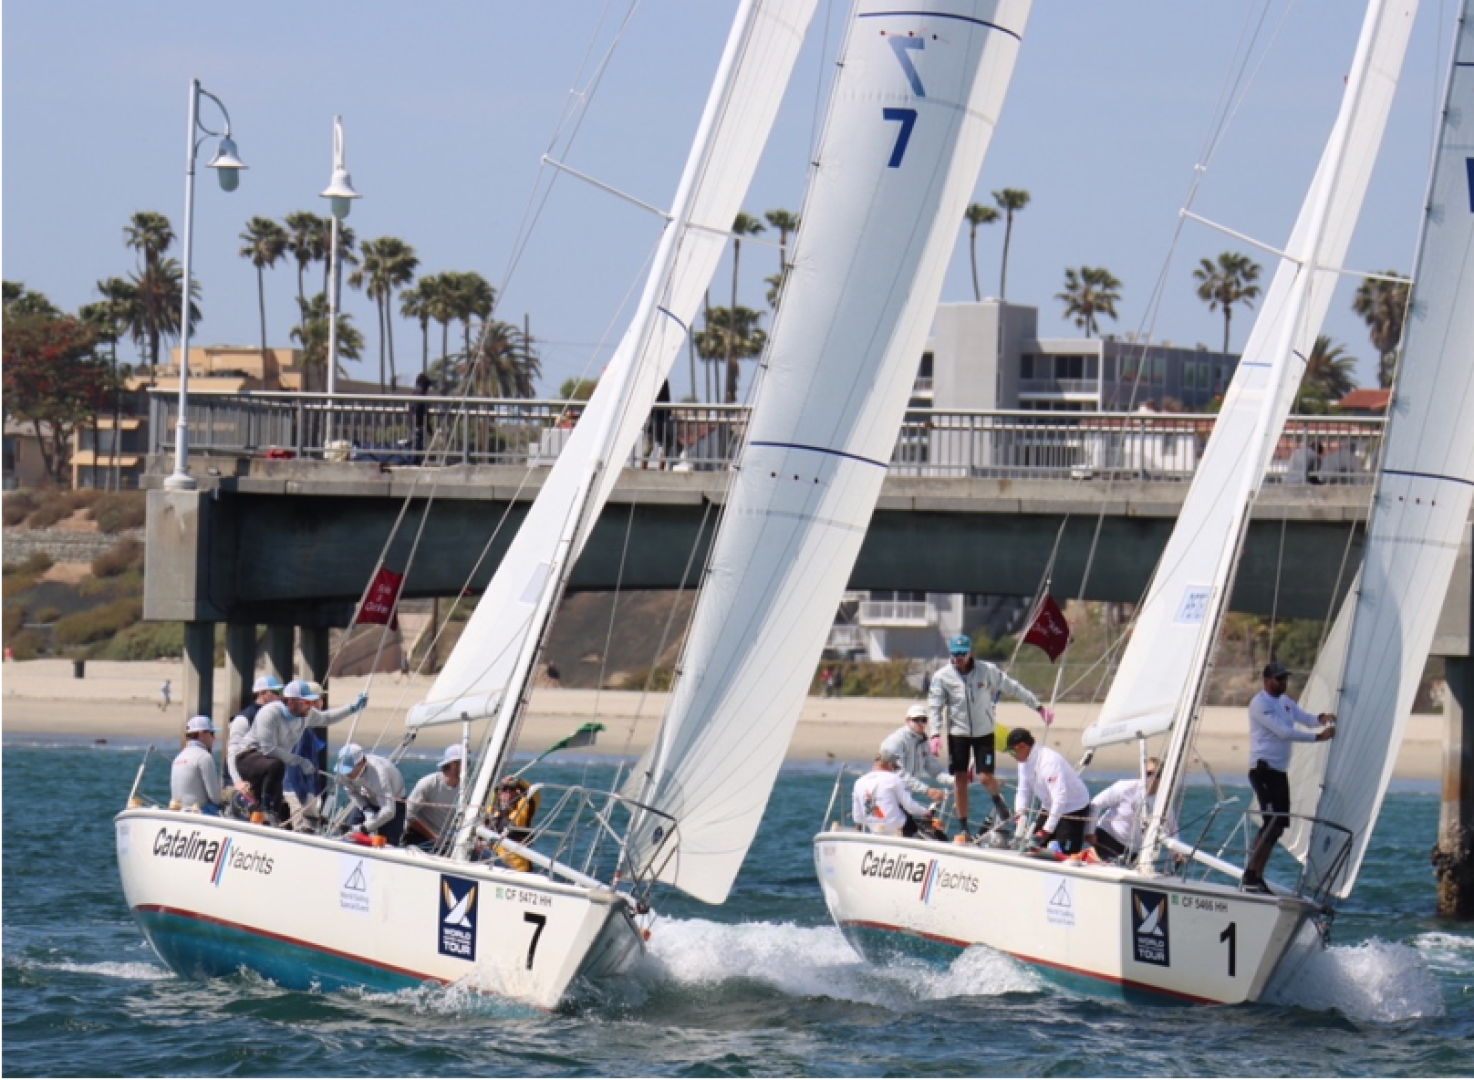 Kjaer, Borch, Perry e Holz Advance to semifinals in ficker cup at Long Beach Yacht Club